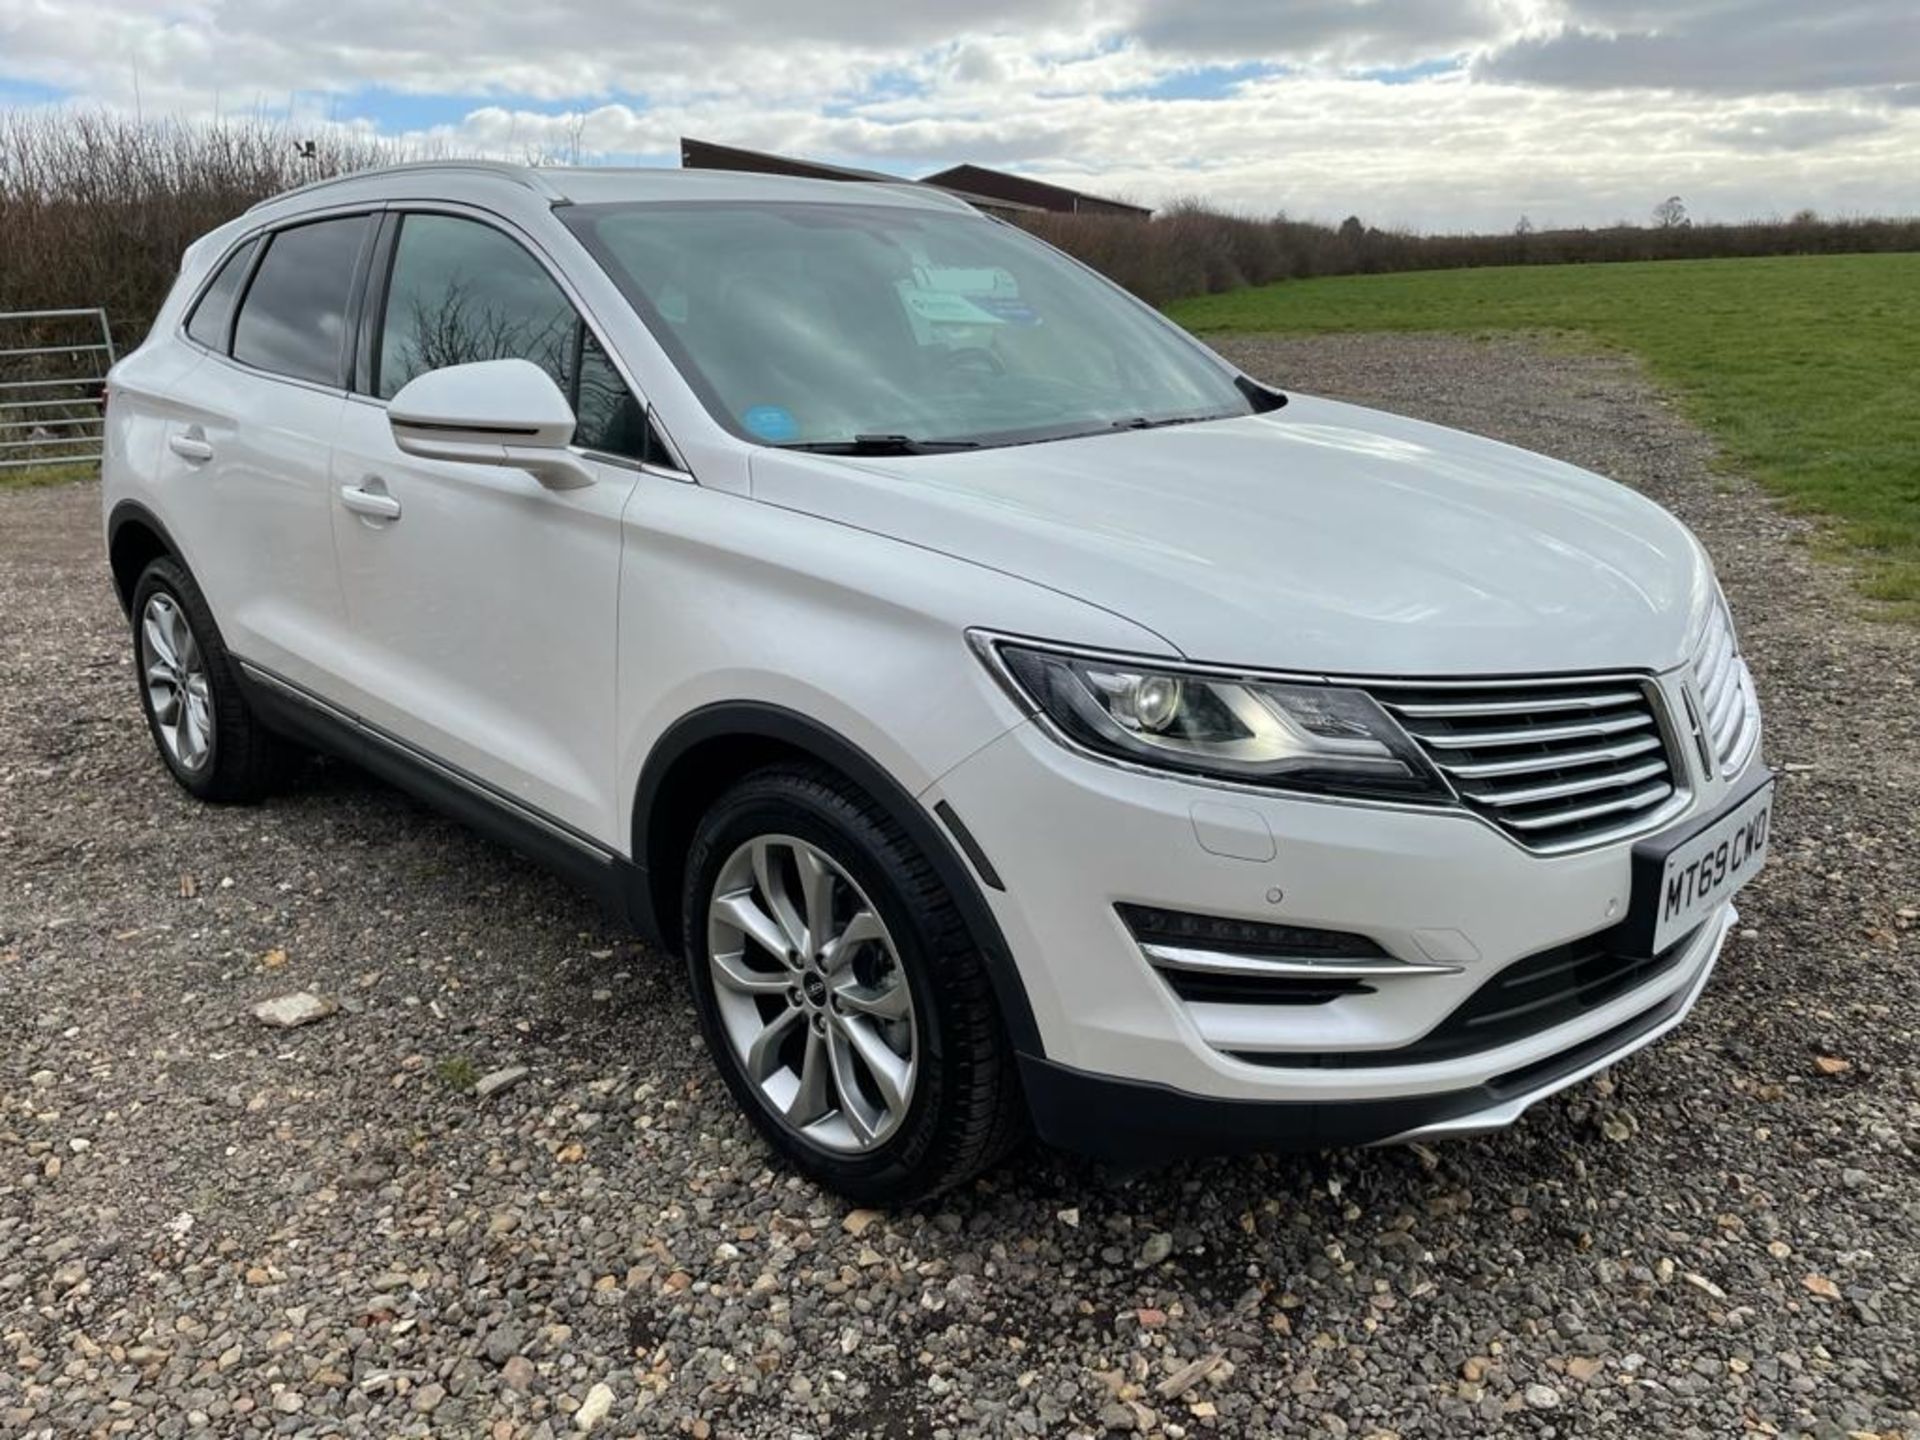 69 REG LINCOLN MKC RESERVE 2.0L ECOBOOST, 200bhp, PLATINUM WHITE WITH CAPPUCCINO LEATHER INTERIOR